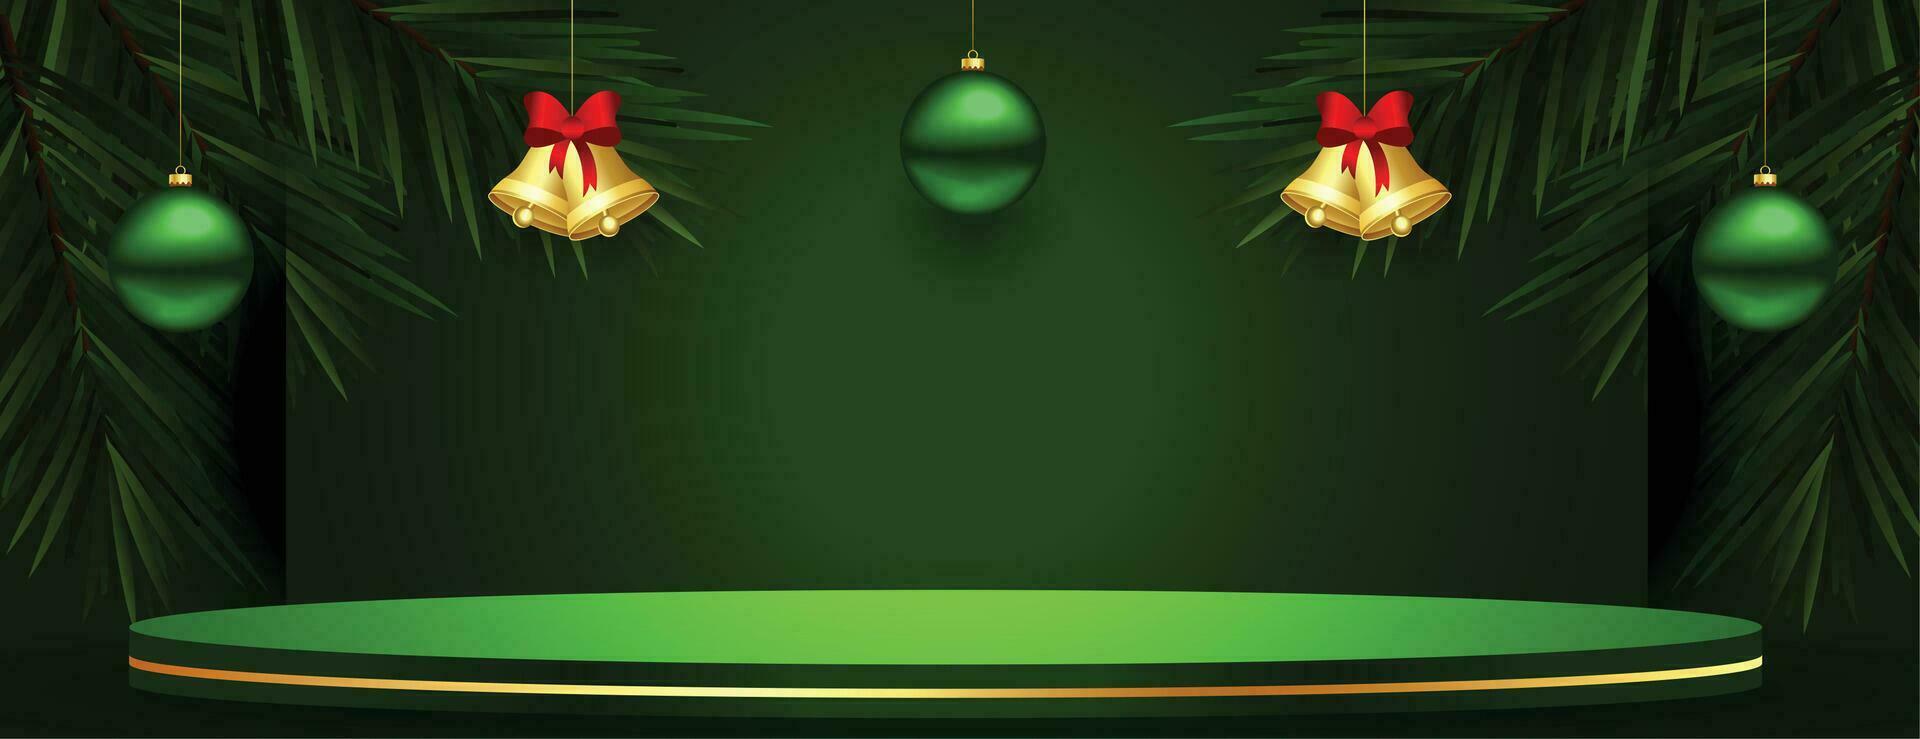 3d podium green banner with xmas bell and ball in hanging style vector